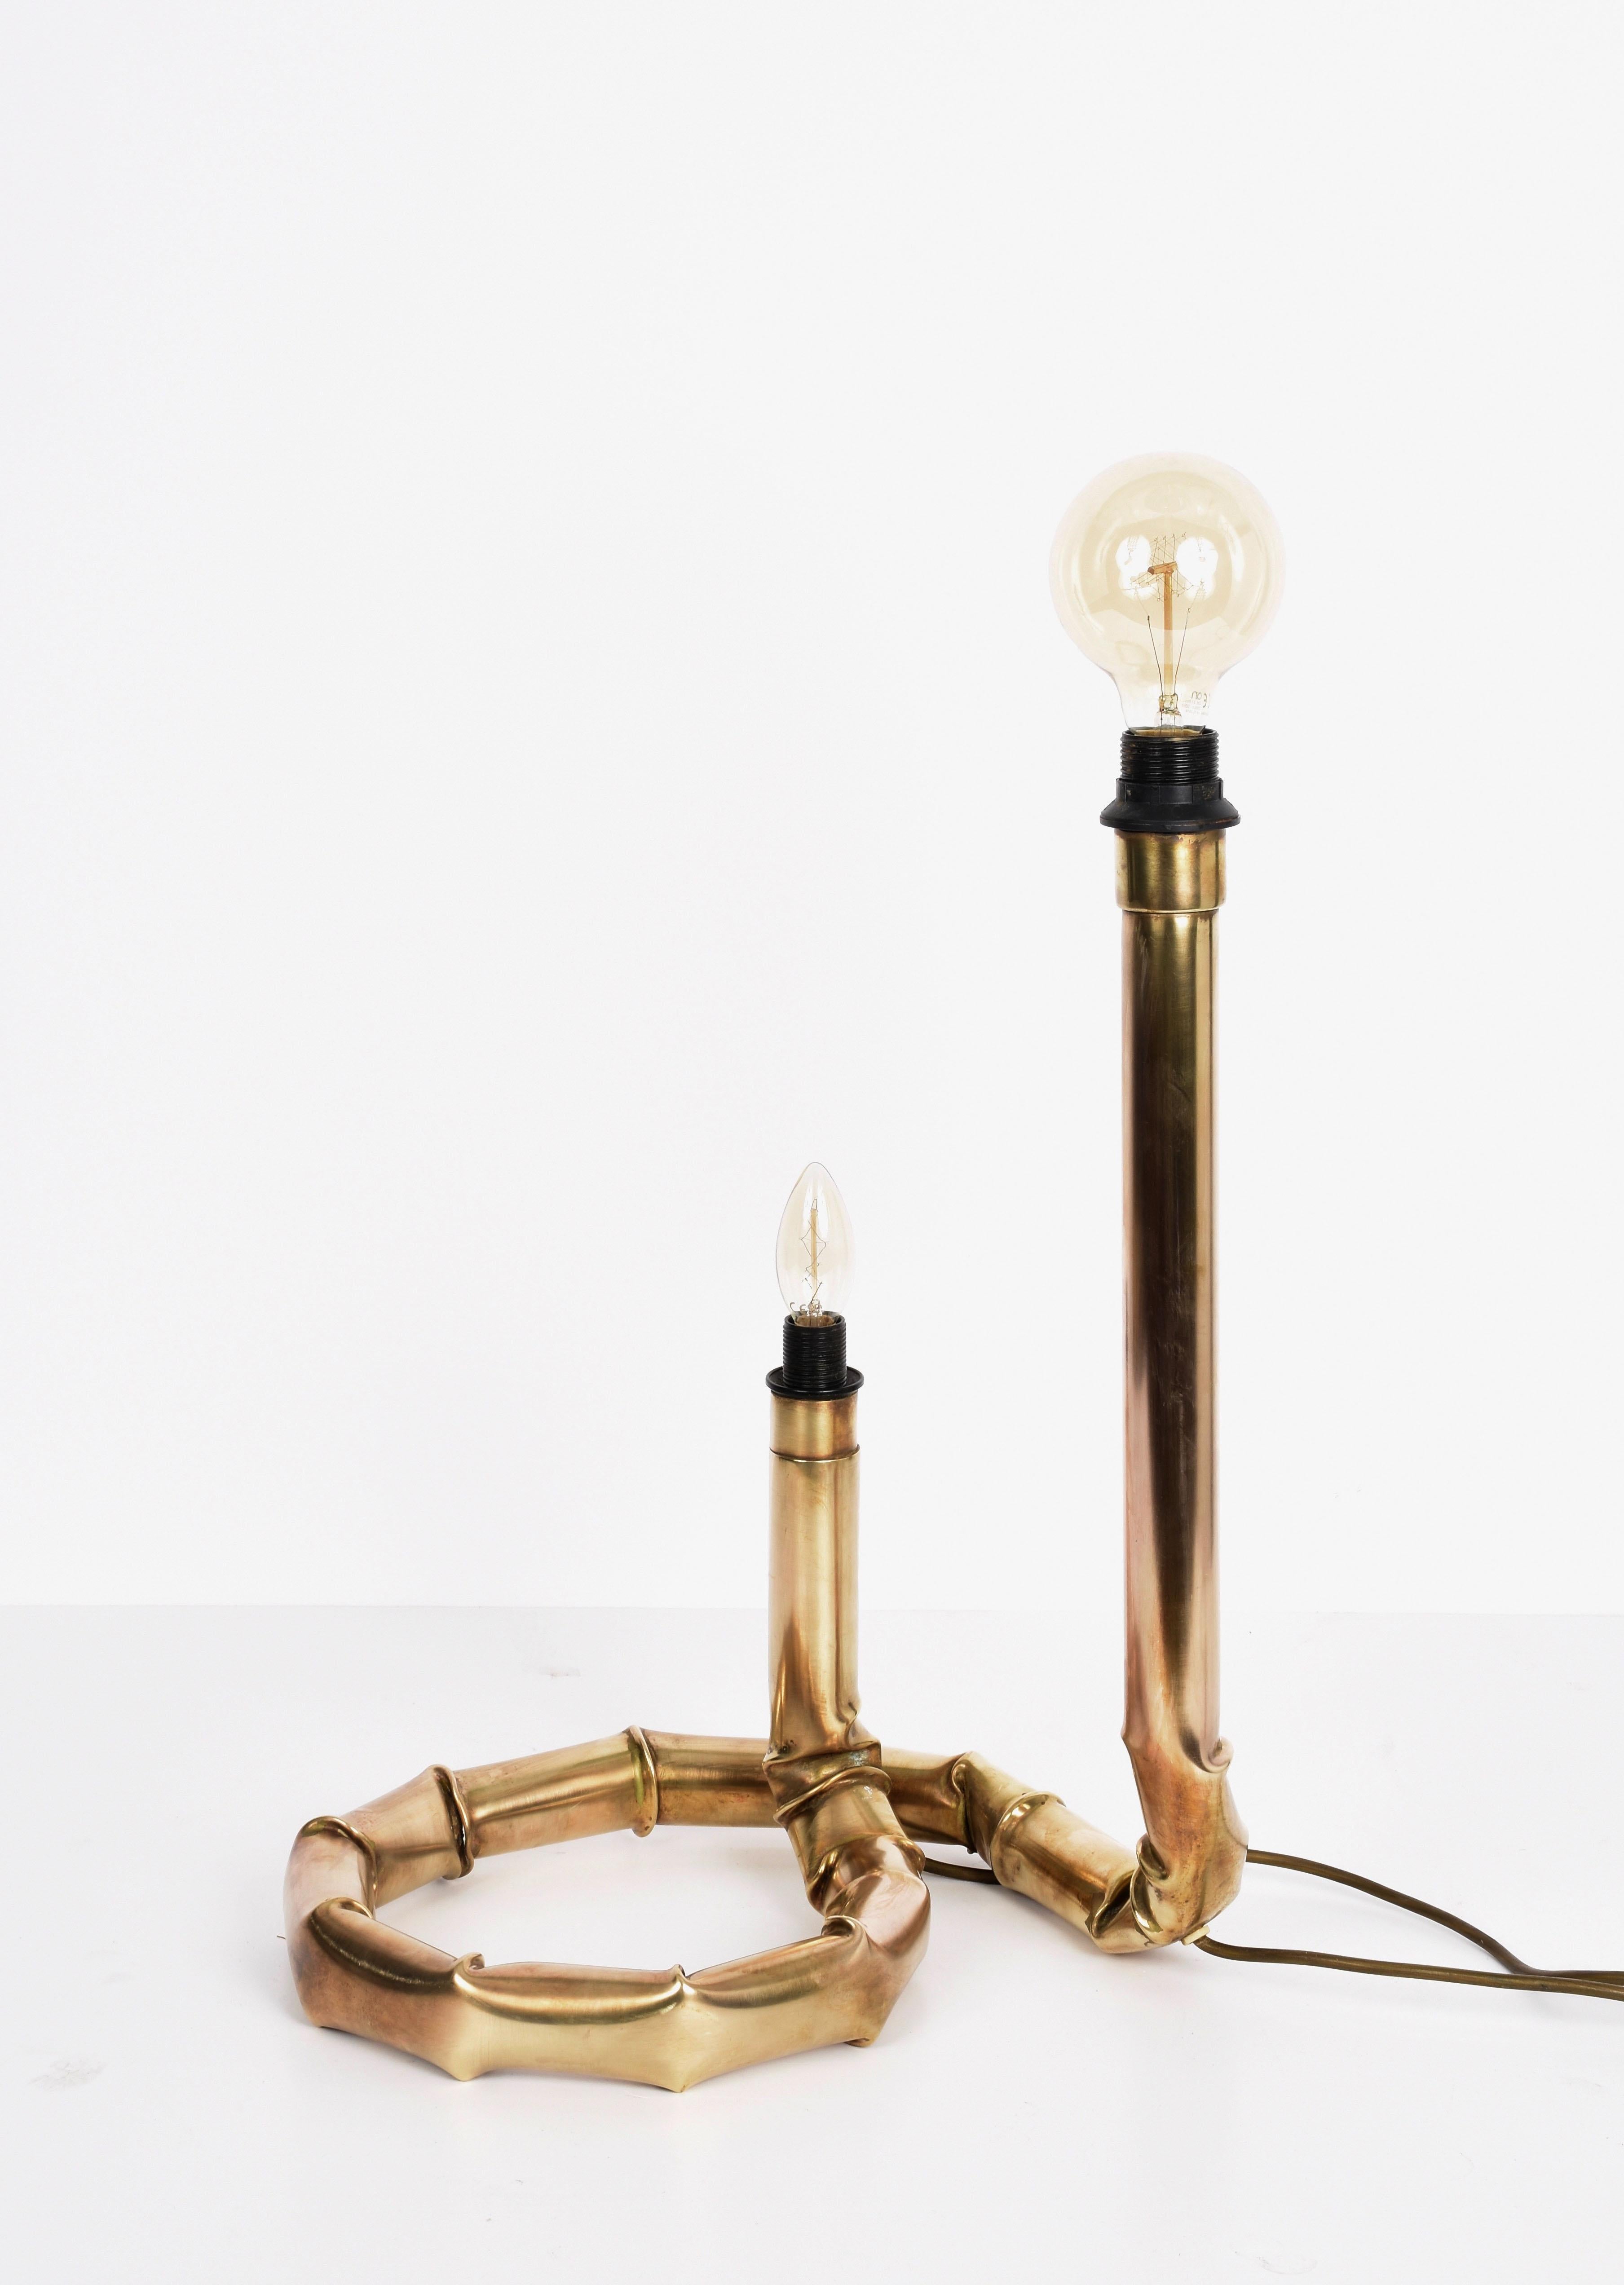 Midcentury brushed and worked brass double light table lamp. This amazing item was designed in Italy during 1960s by the master designer Tommaso Barbi.

This unique piece can be defined as a sculptured lamp because of the way the brass has been